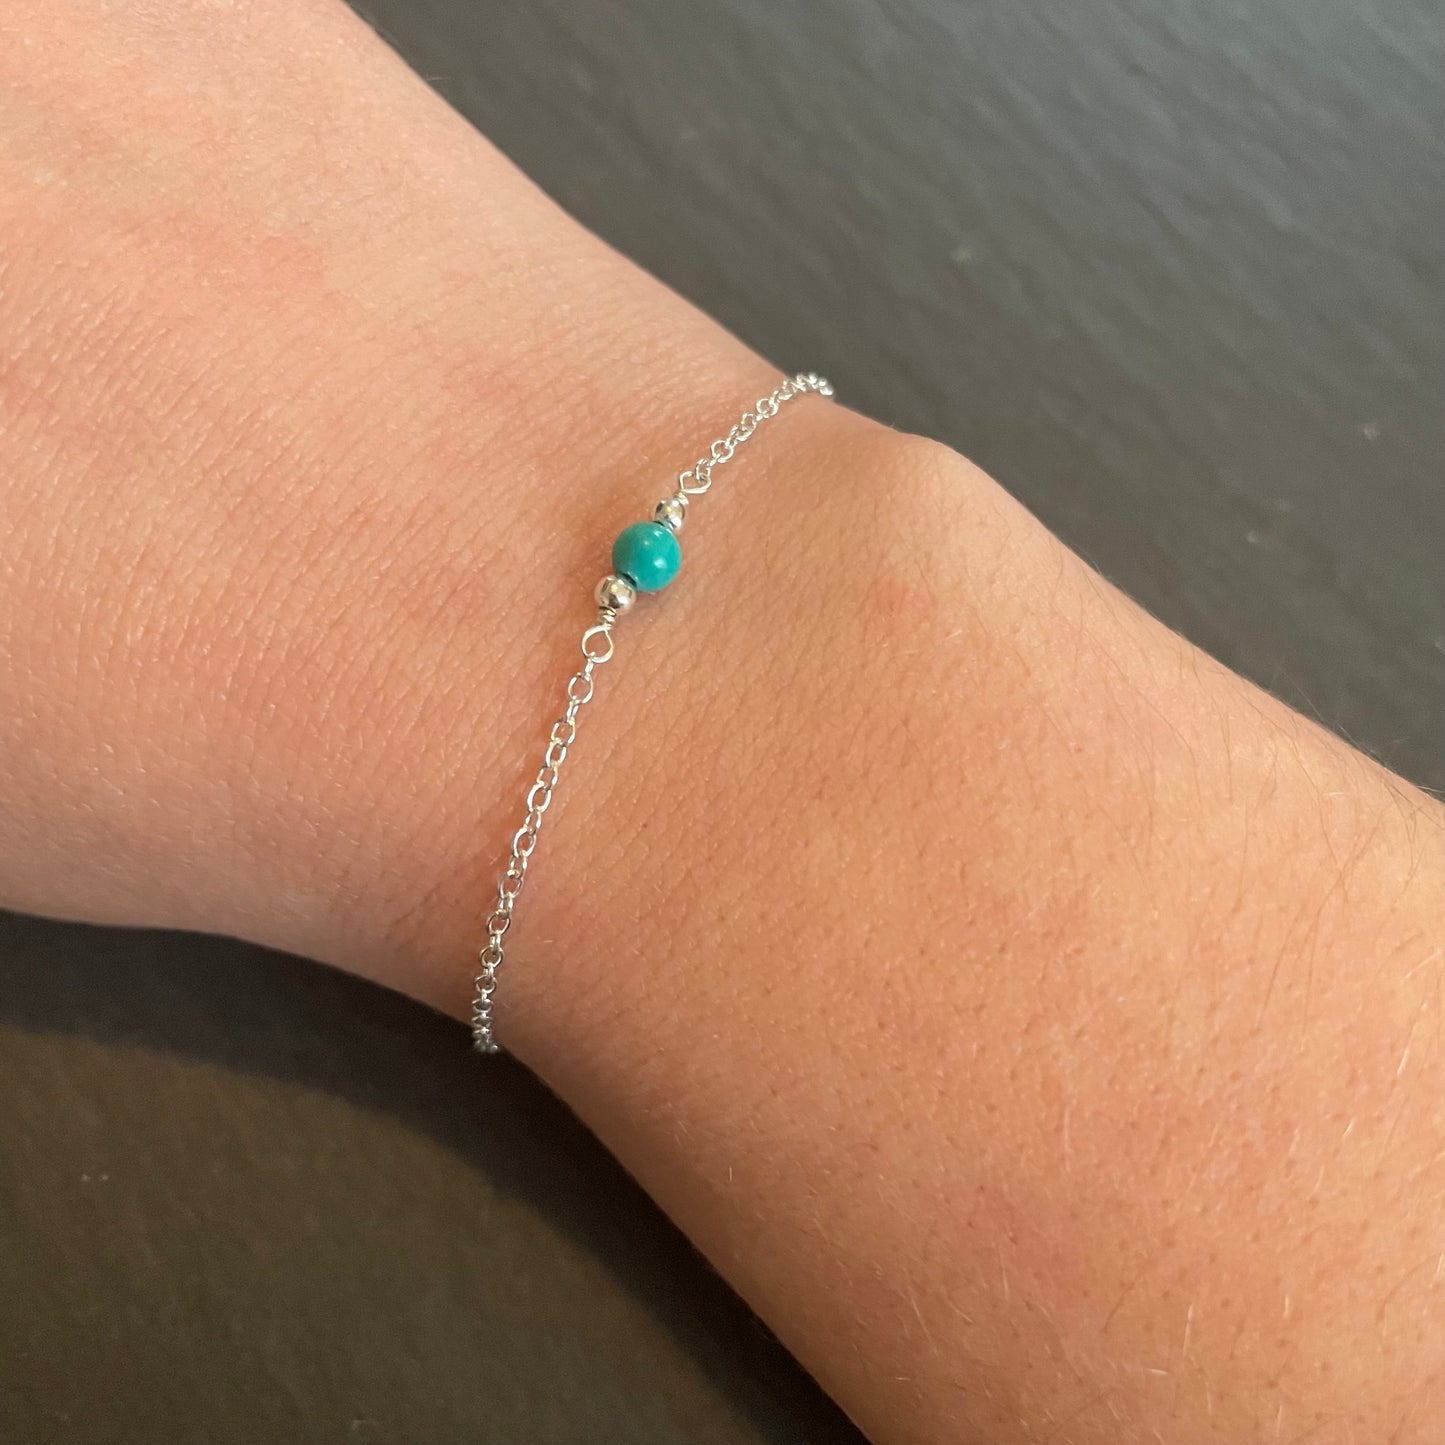 Single Turquoise Bead and Sterling Silver Bracelet